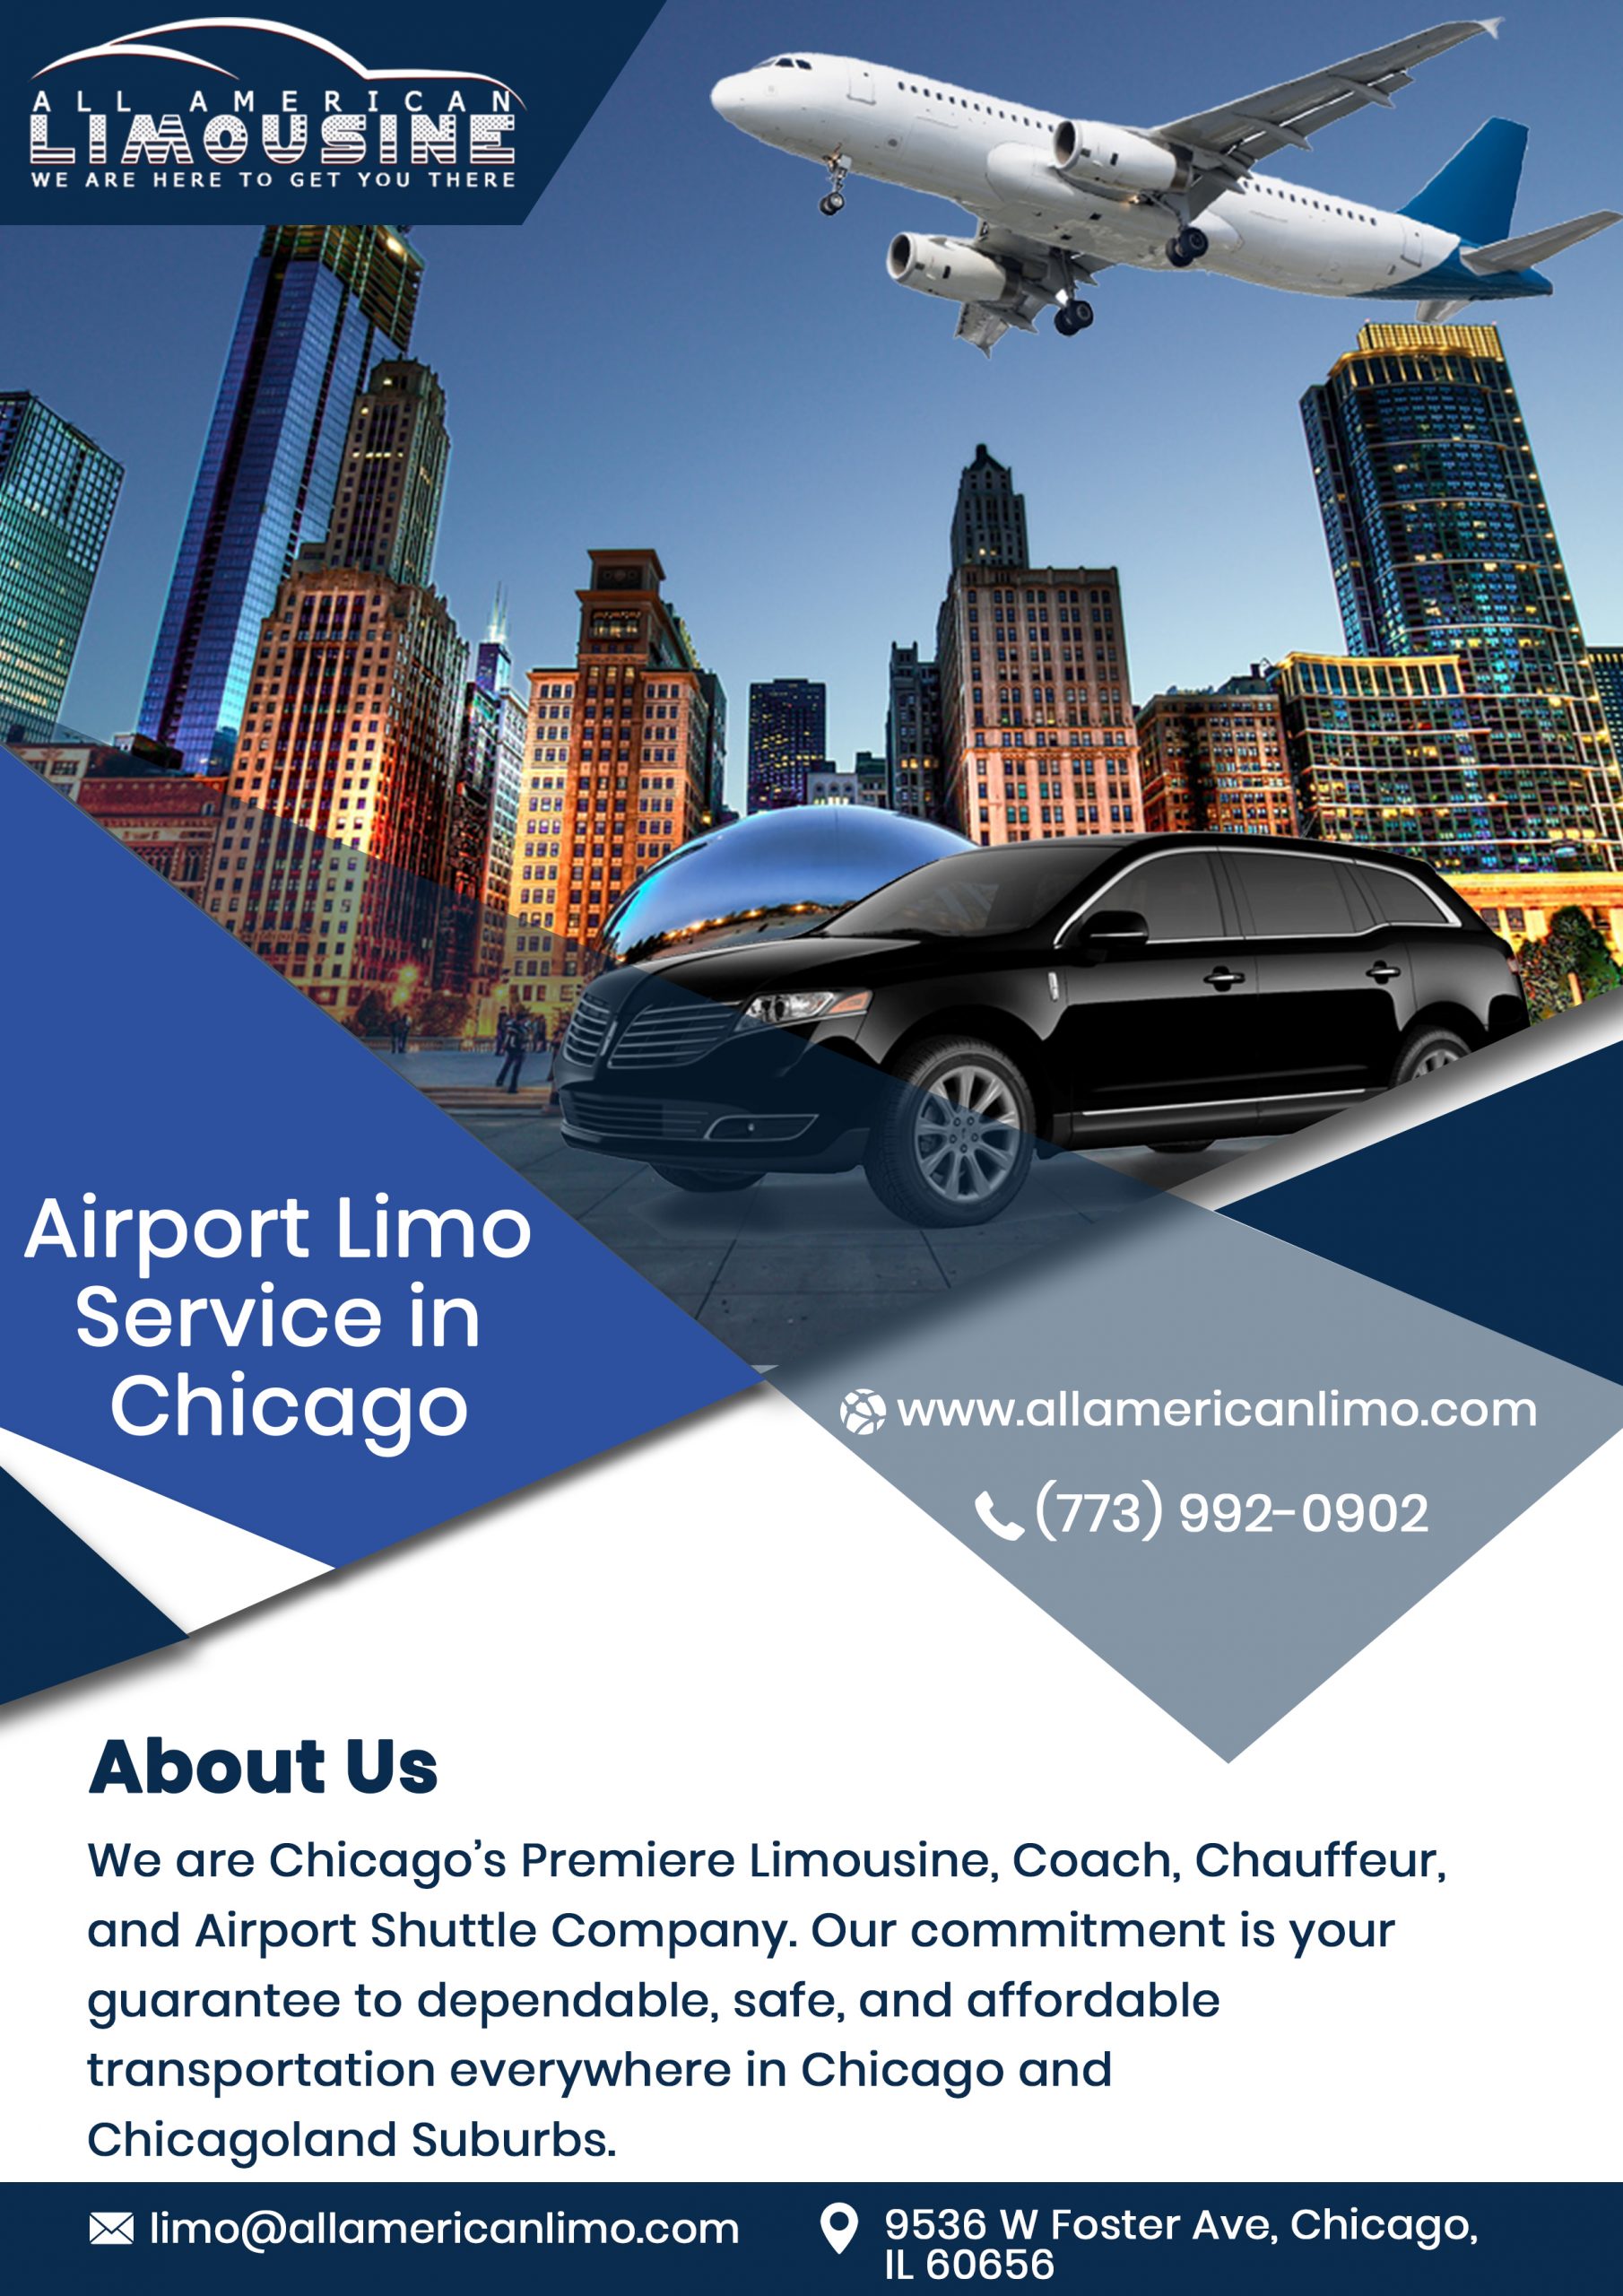 Chicago Car Service Near Me 60622, Party Bus 60622, Mercedes Sprinter Limo to 60622, Chicago Limo 60622, Limo Service 60622 to Airport, Hire, Rent, Get, Find, Car Service 60622 to Airport, Transportation Service 60622 to O'Hare, Corporate Travel 60622, Airport Travel 60622